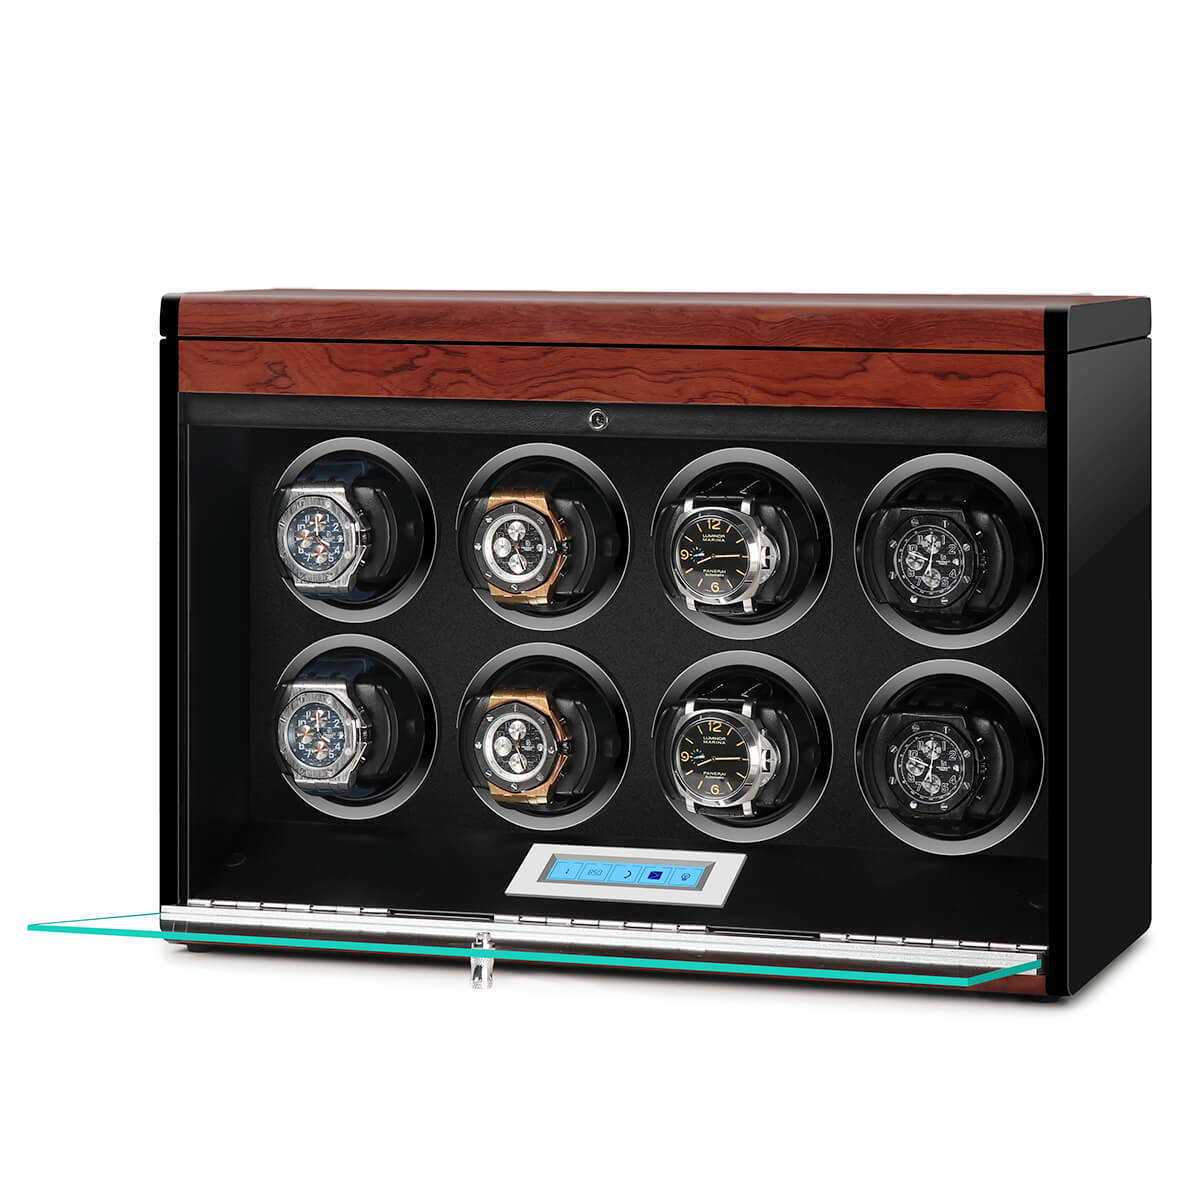 8 Watch Winder with Extra Storage Wood Veneer Finish by Aevitas - Special Offer